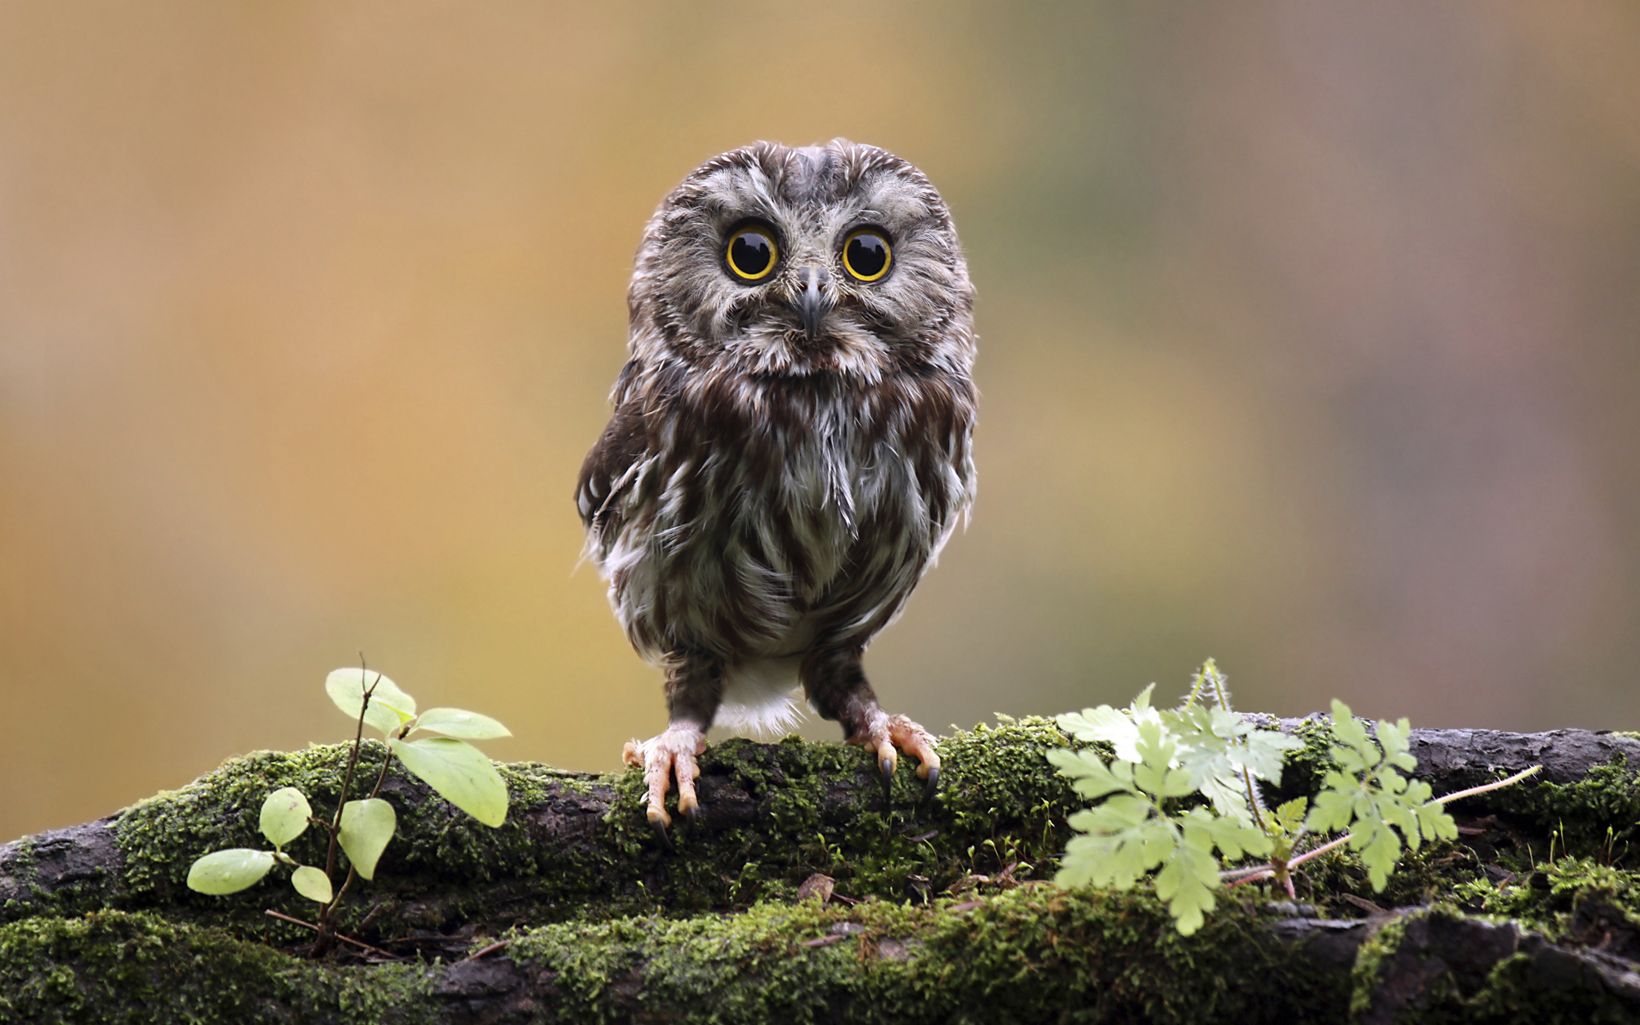 Northern saw-whet owl on log. The northern saw-whet owl is the smallest owl species native to North America, reaching only seven inches. This species makes a call similar to a saw which explains its name.  © Megan Lorenz